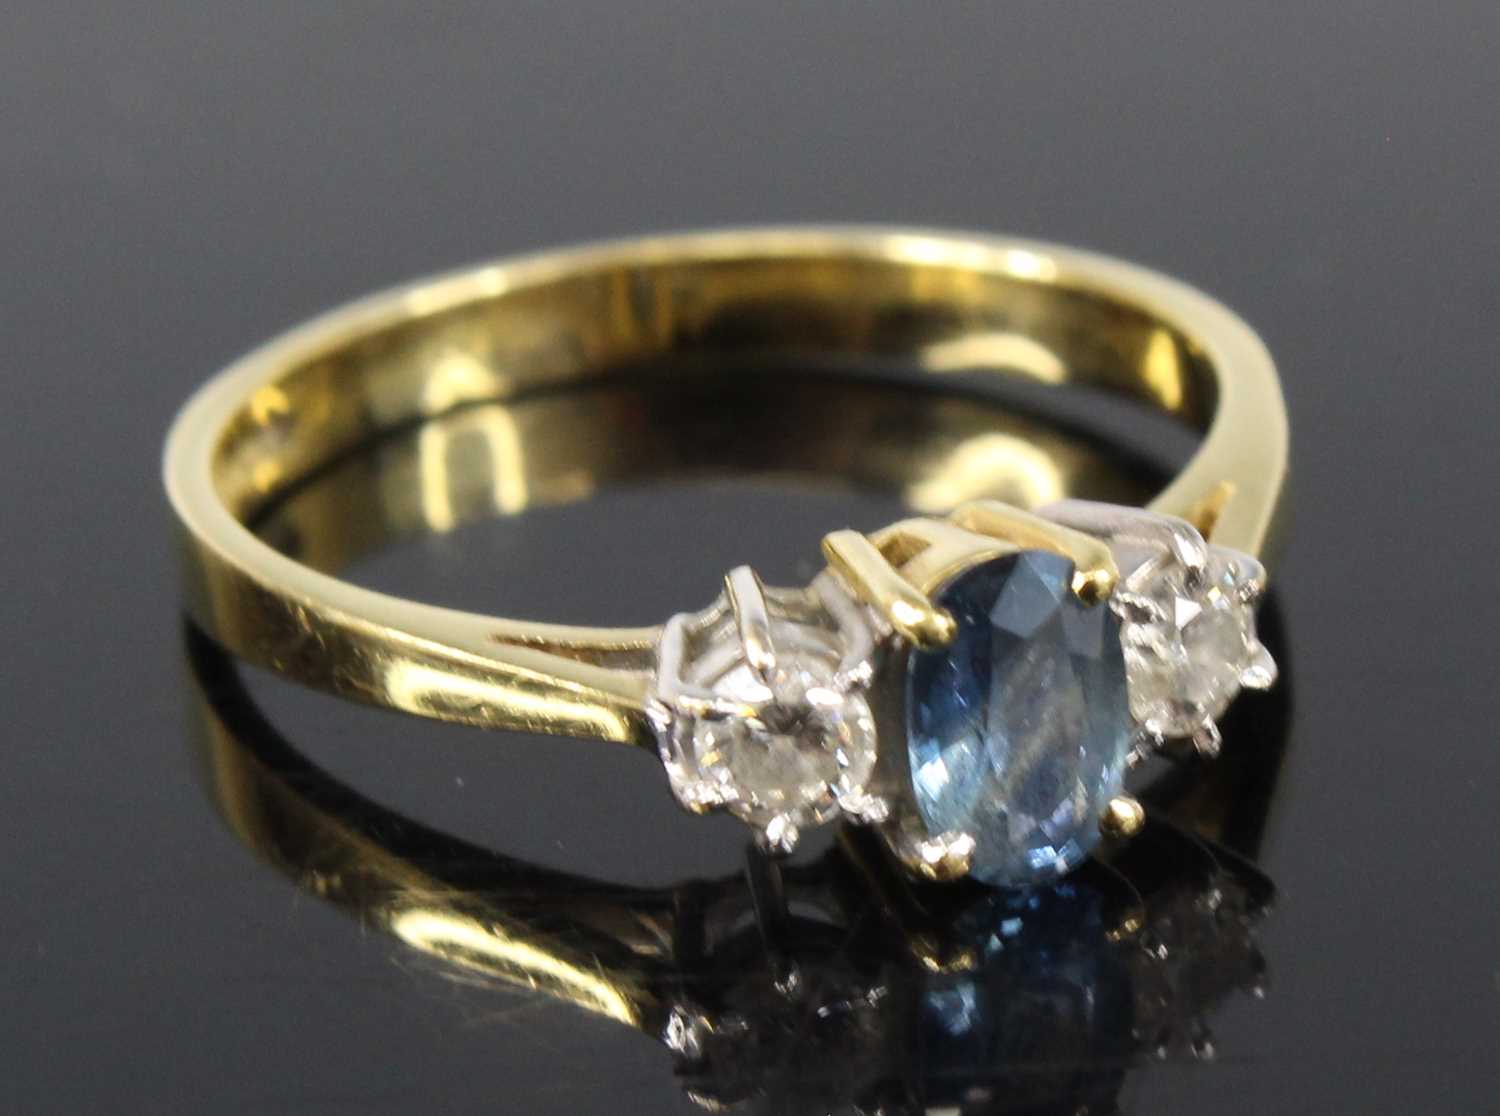 An 18ct yellow and white gold, sapphire and diamond three-stone ring, featuring a centre oval